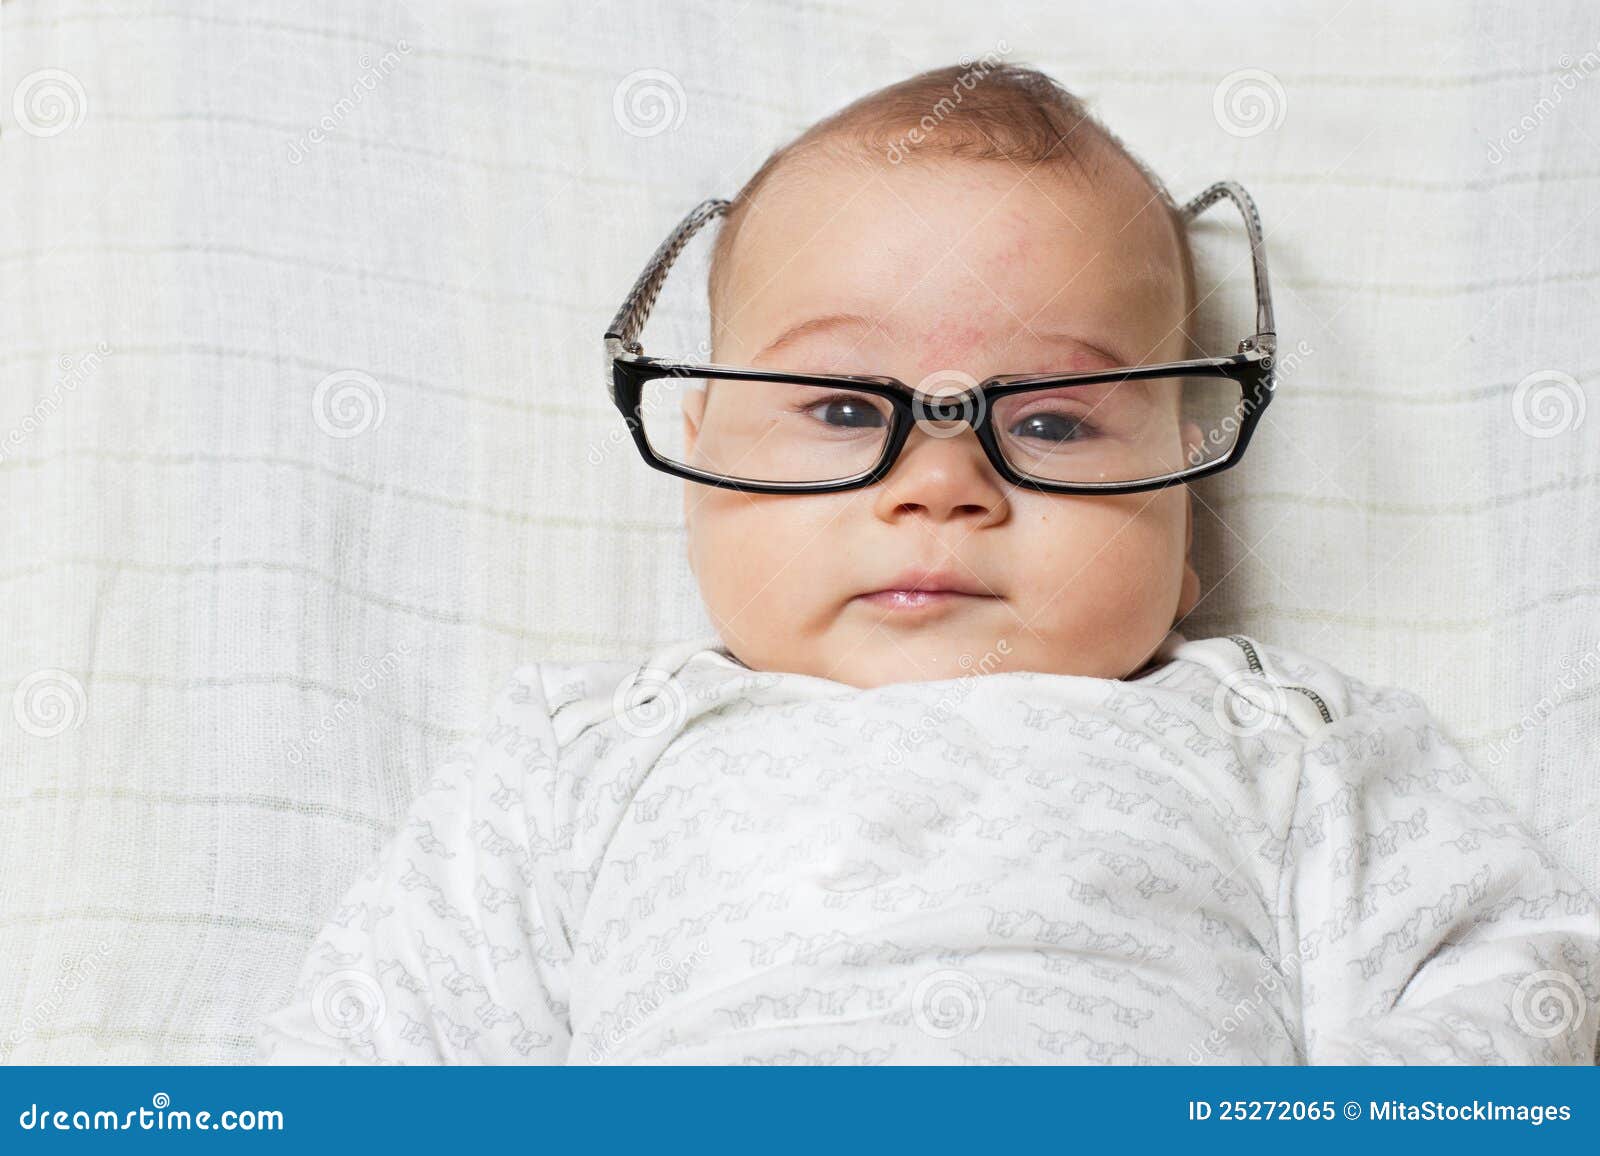 Funny Smart Baby Royalty Free Stock Photo - Image: 25272065